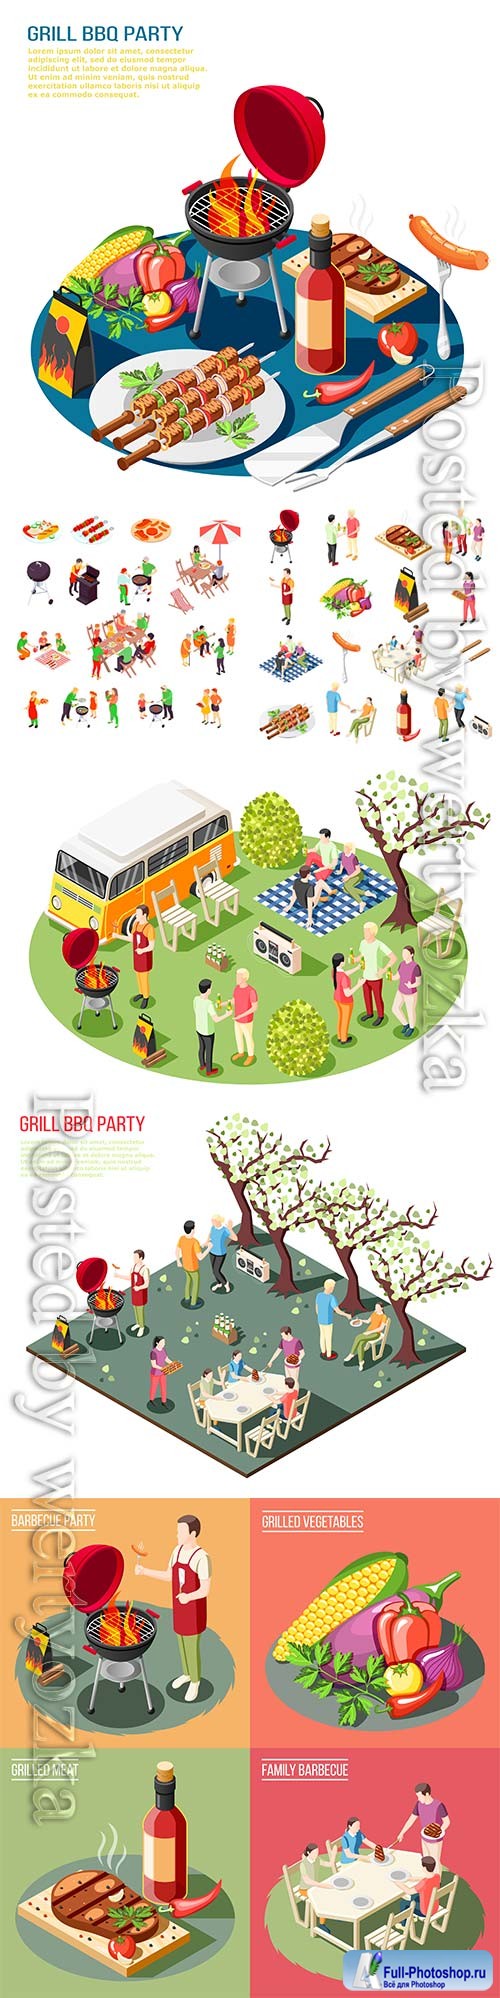 Barbecue grill party isometric icons collection with isolated icons grill food outdoors grill and people